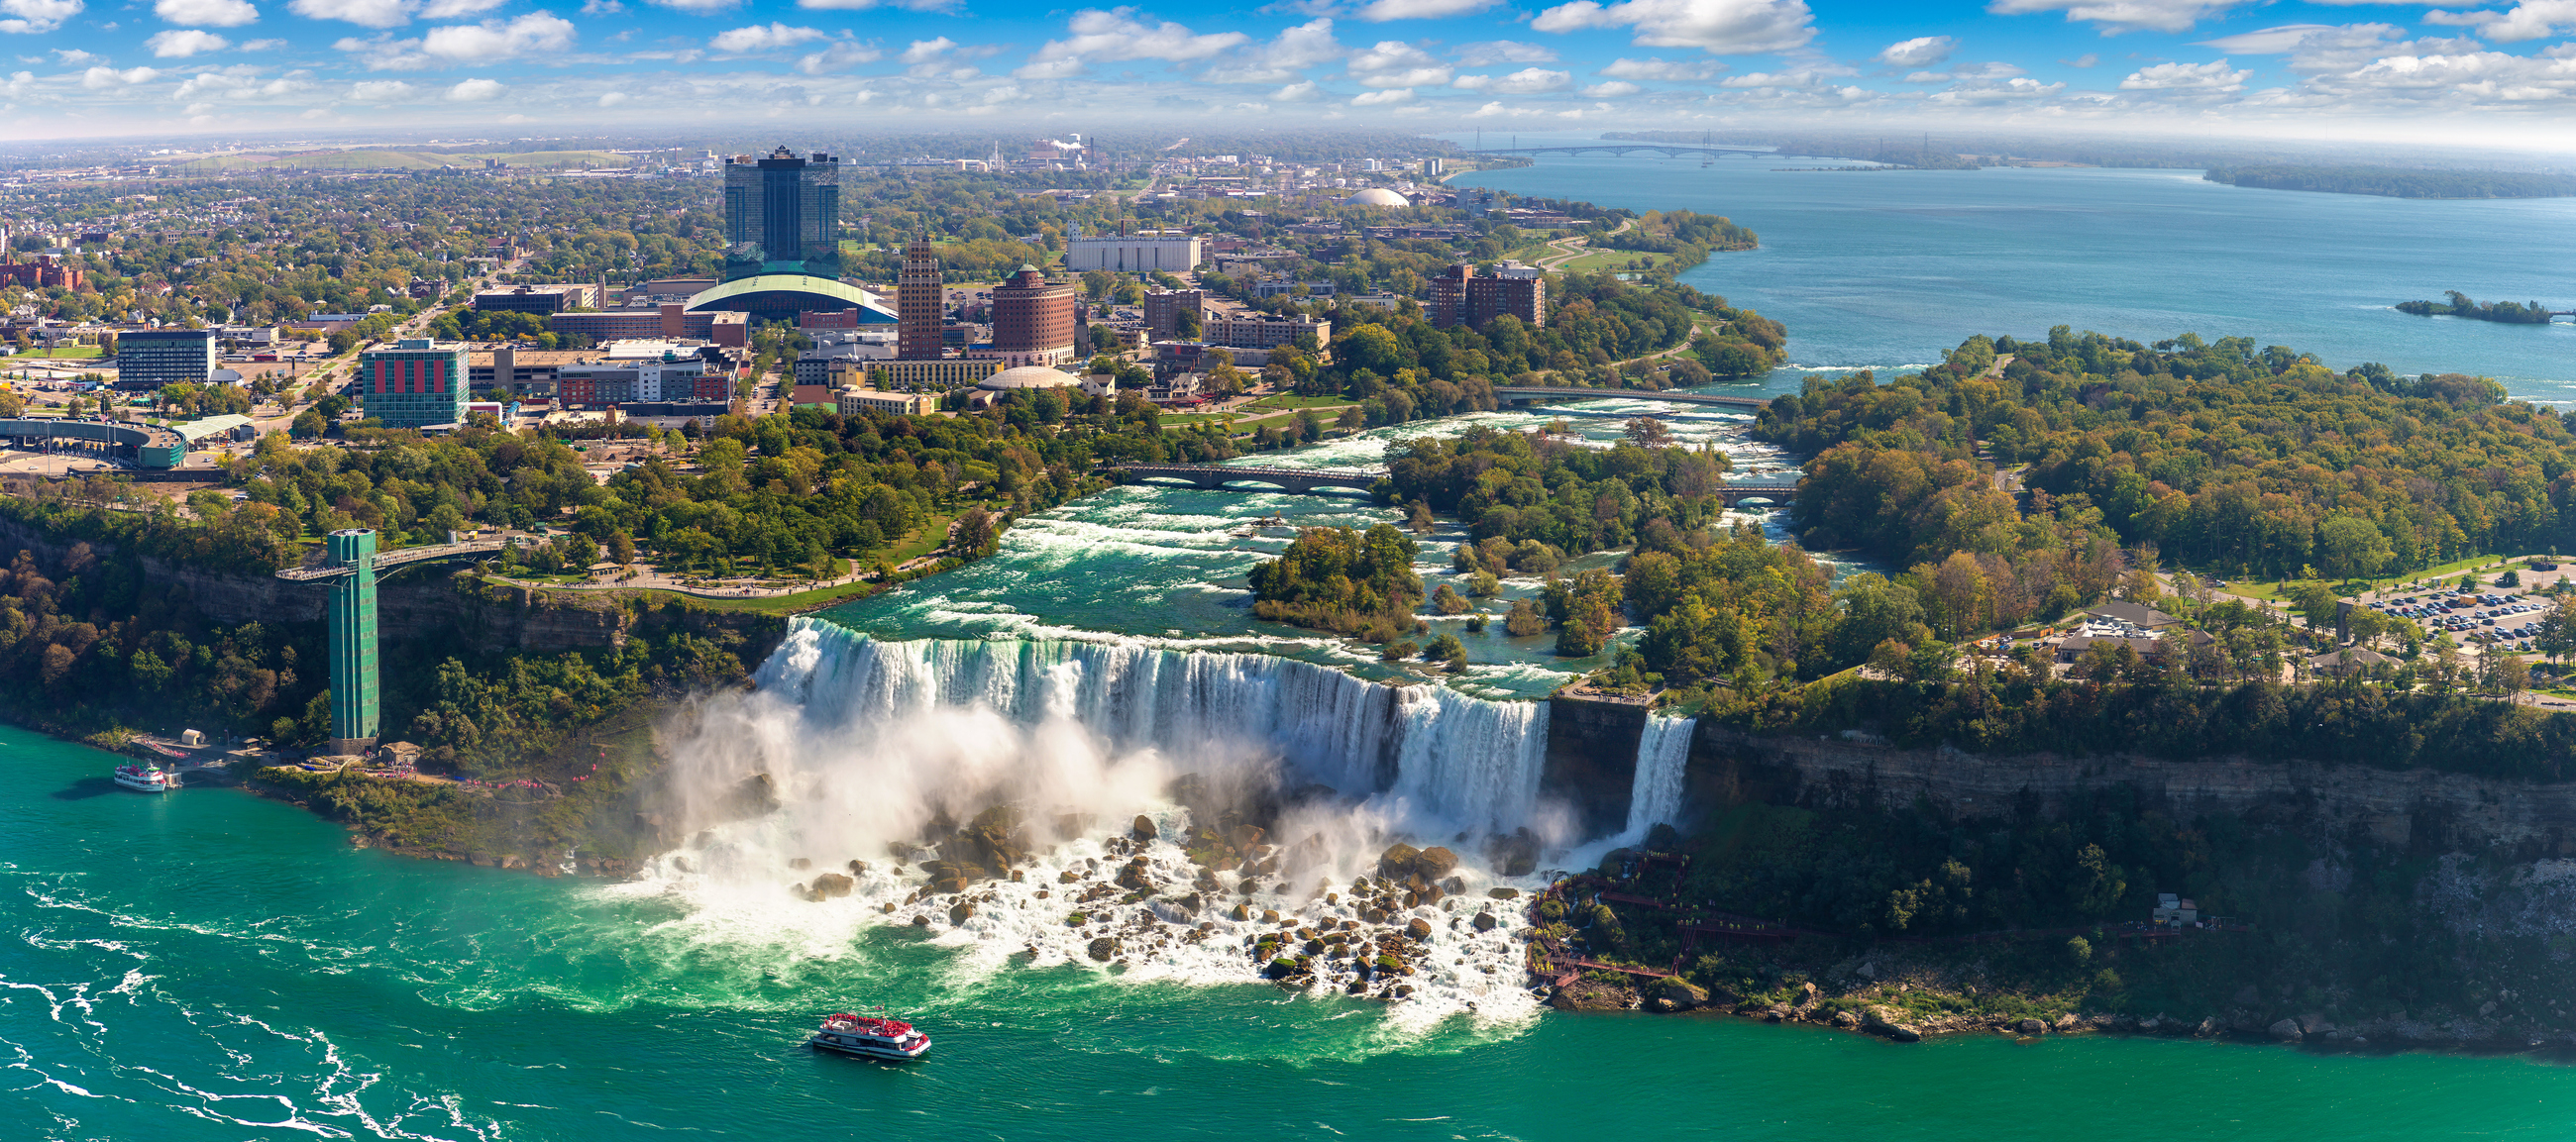 Aerial view of Niagara Falls with surrounding landscape and a boat near the mist